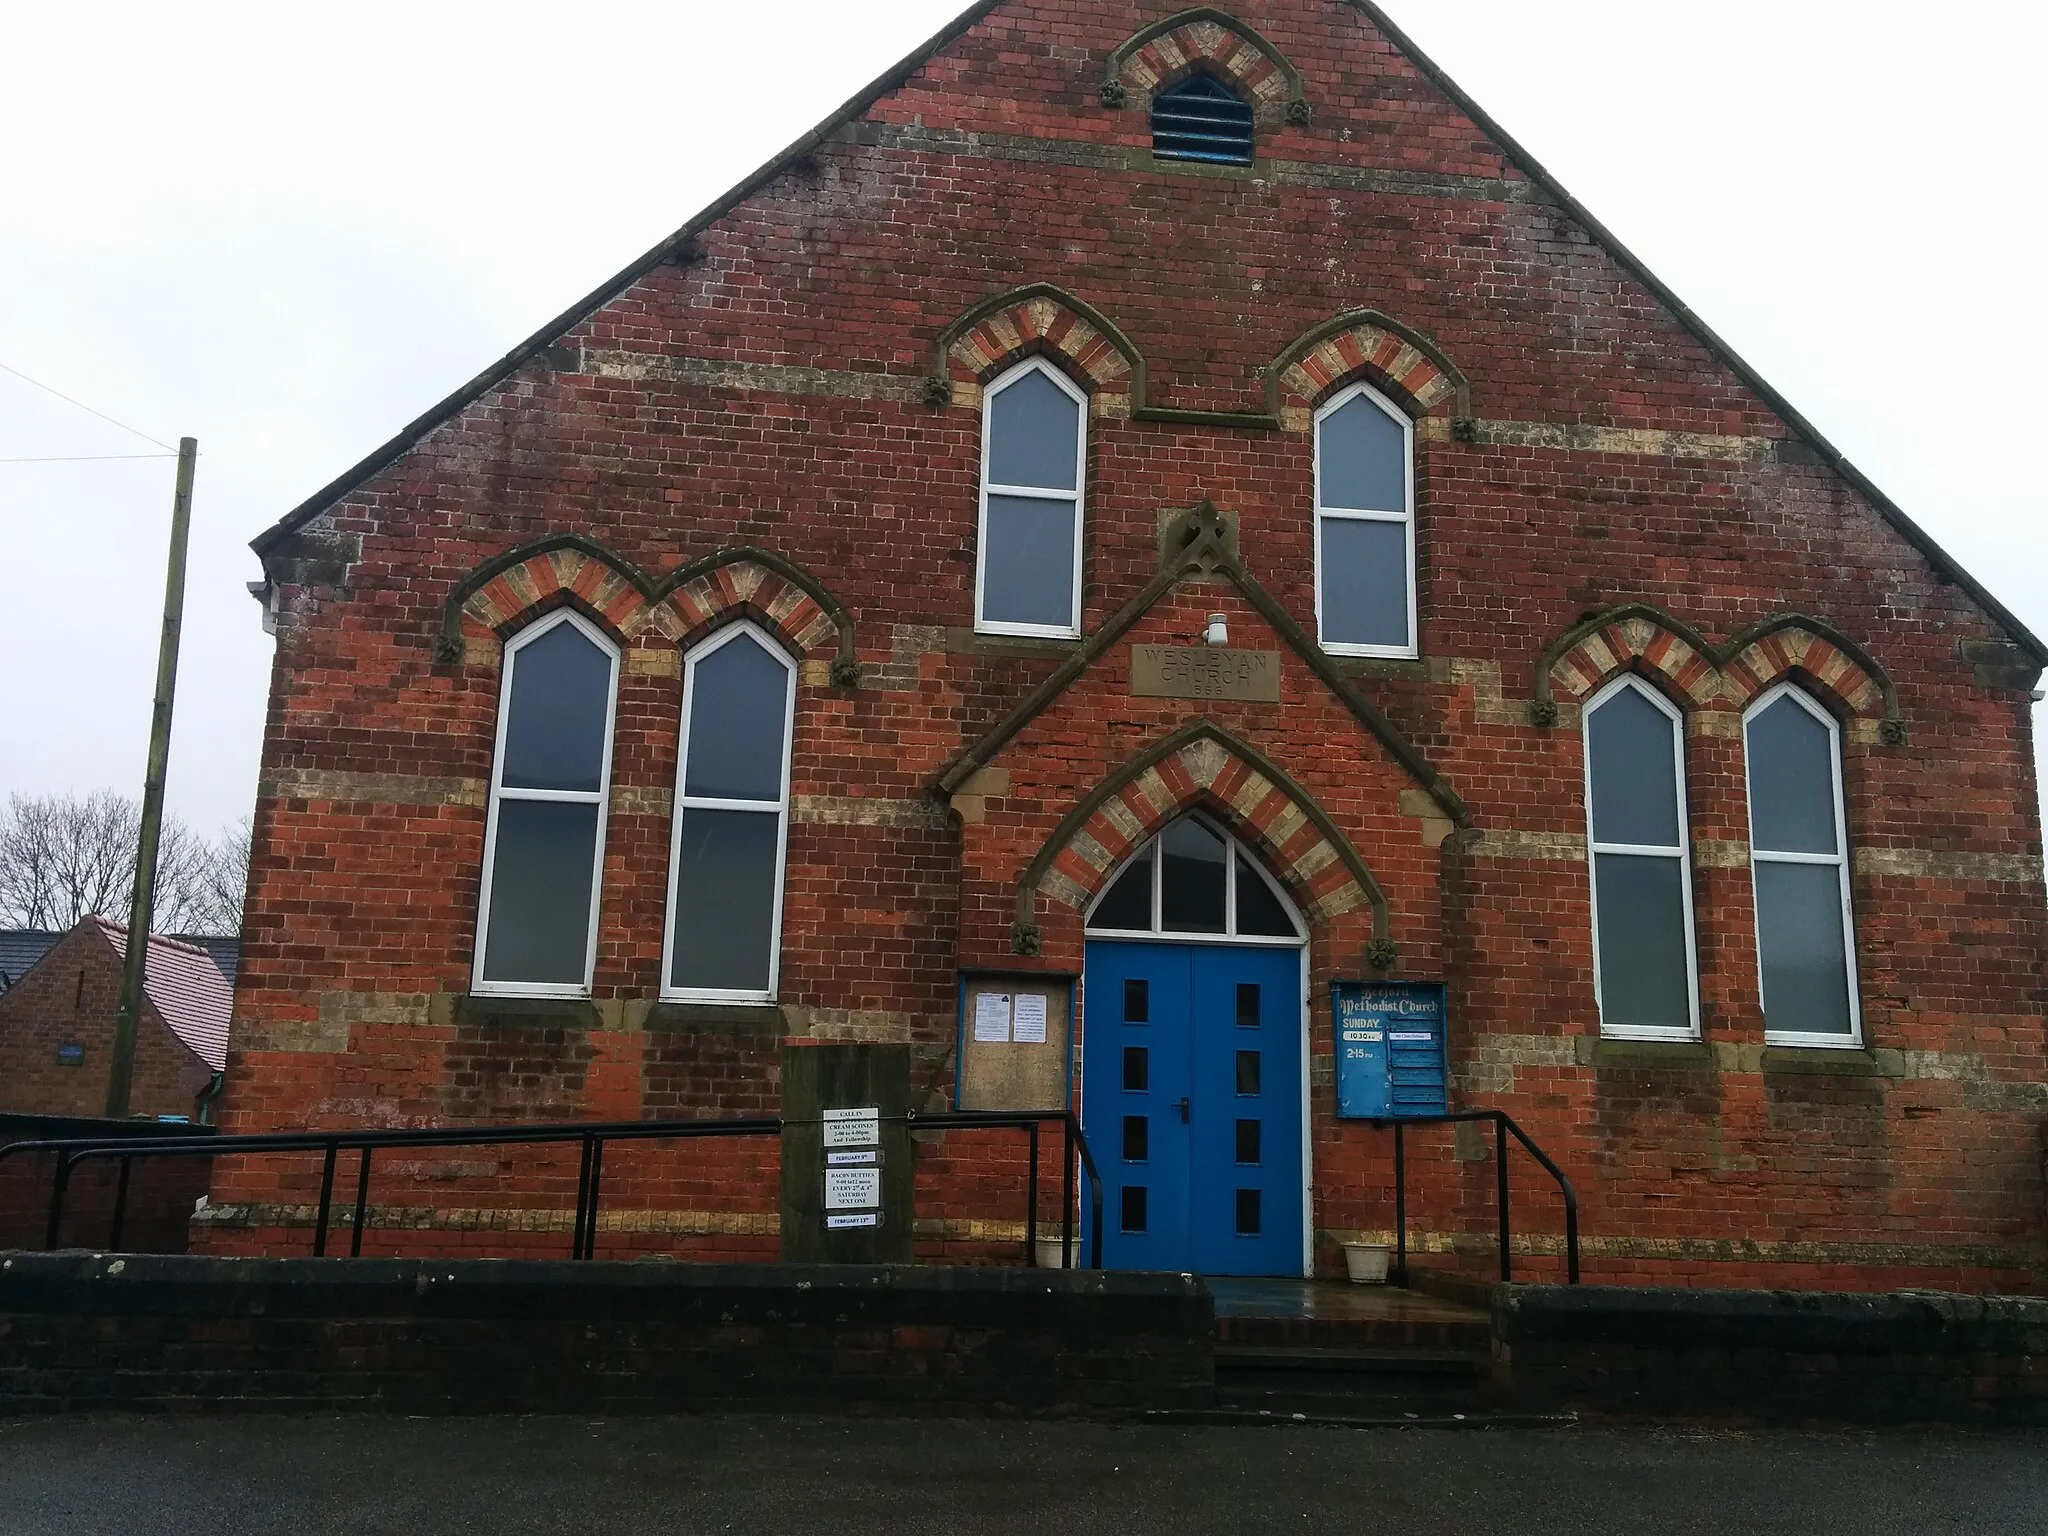 Photo showing: Beeford Methodist Church, Beeford, East Riding of Yorkshire, England.